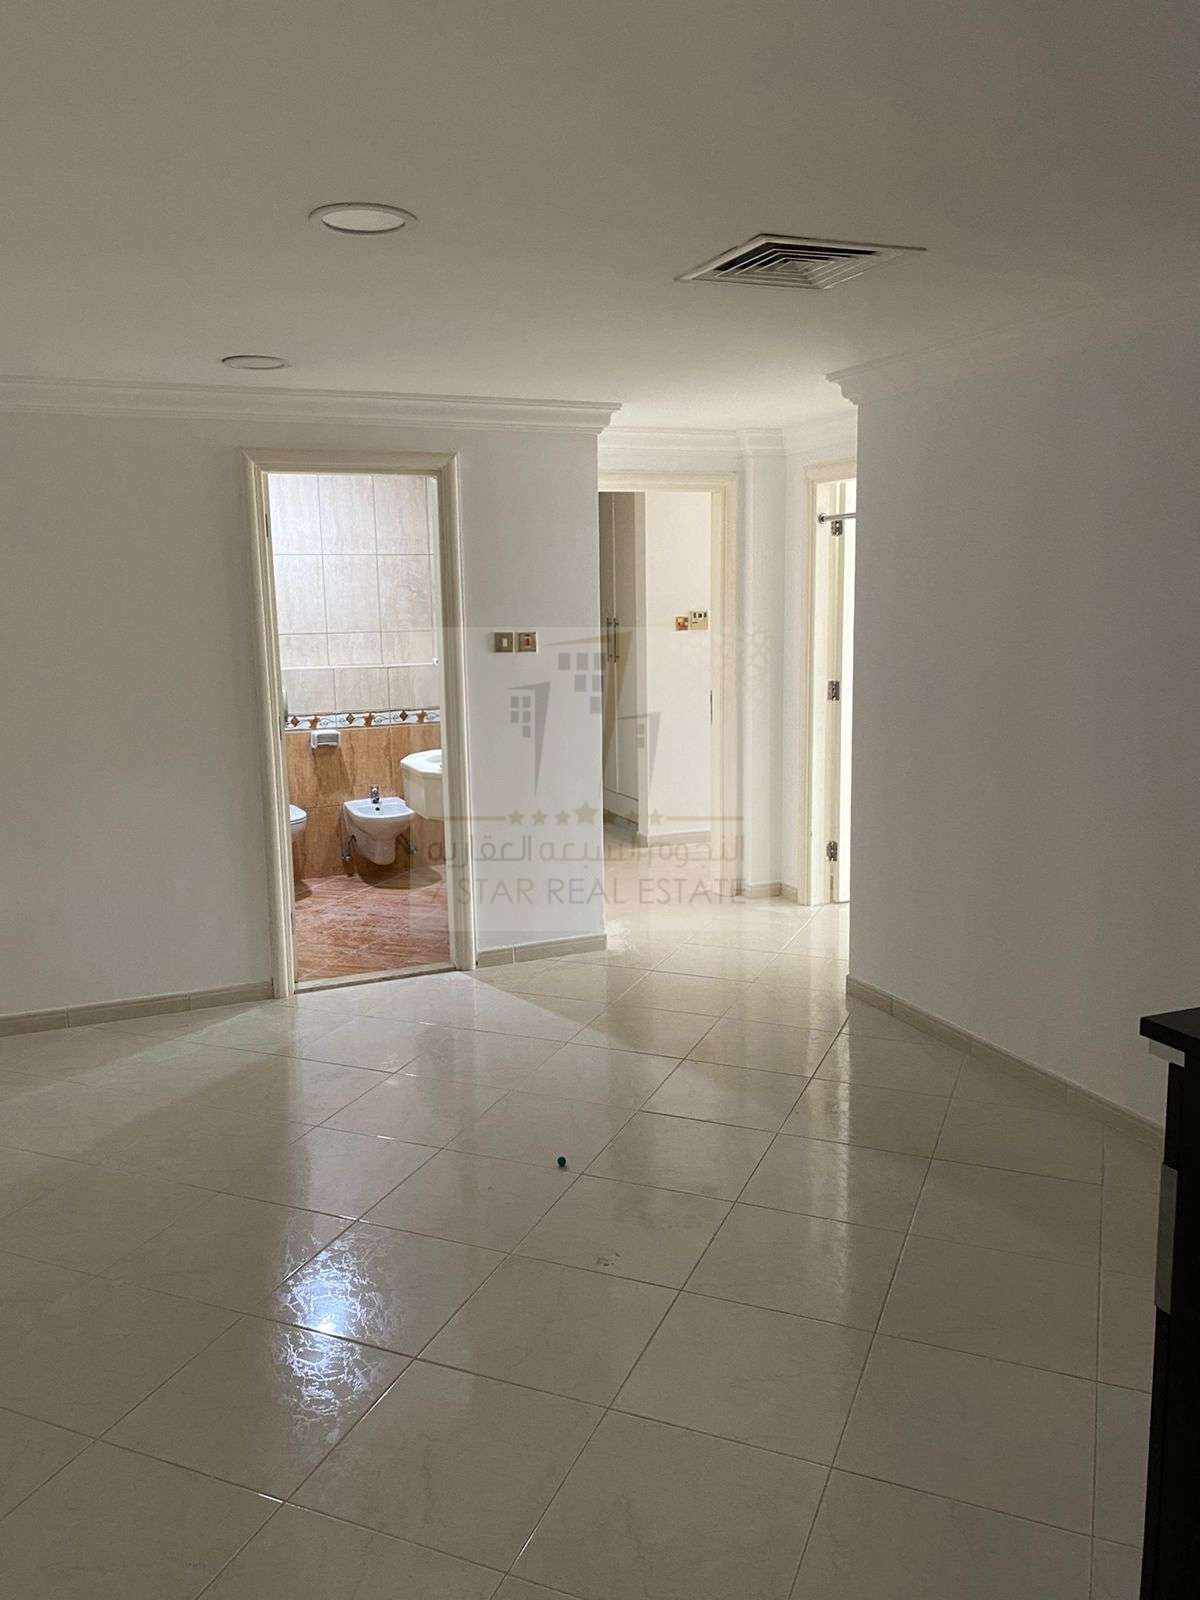 2 BR  Apartment For Rent in Al Khan